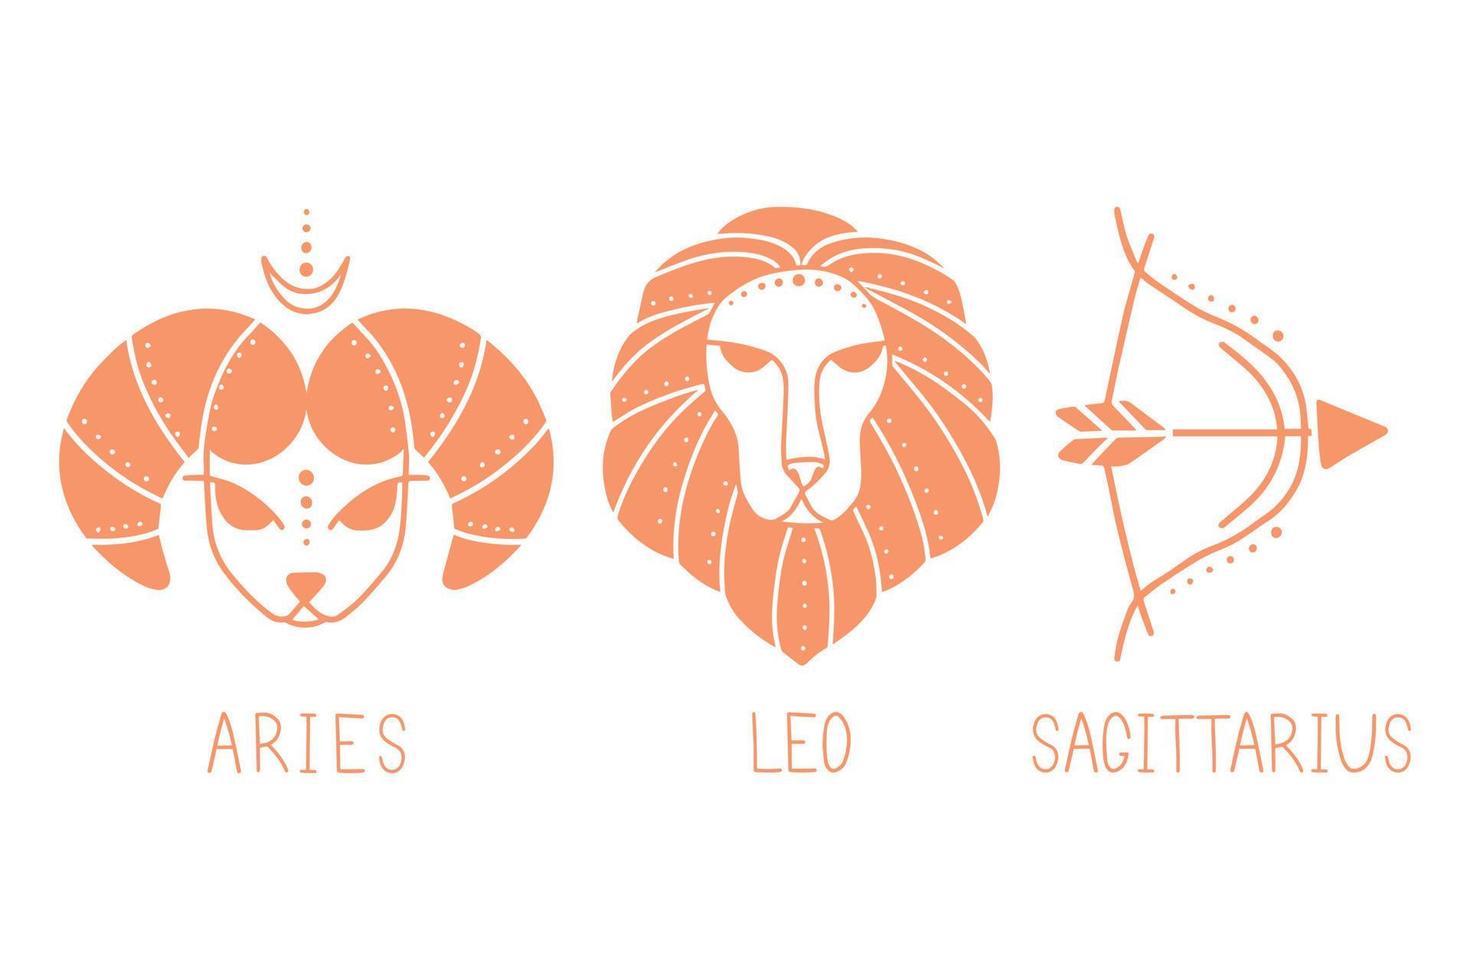 Vector set of fire zodiac signs. Symbols 3 signs with inscriptions. Aries, Leo and Sagittarius. Vector images of zodiac signs for astrology and horoscopes.